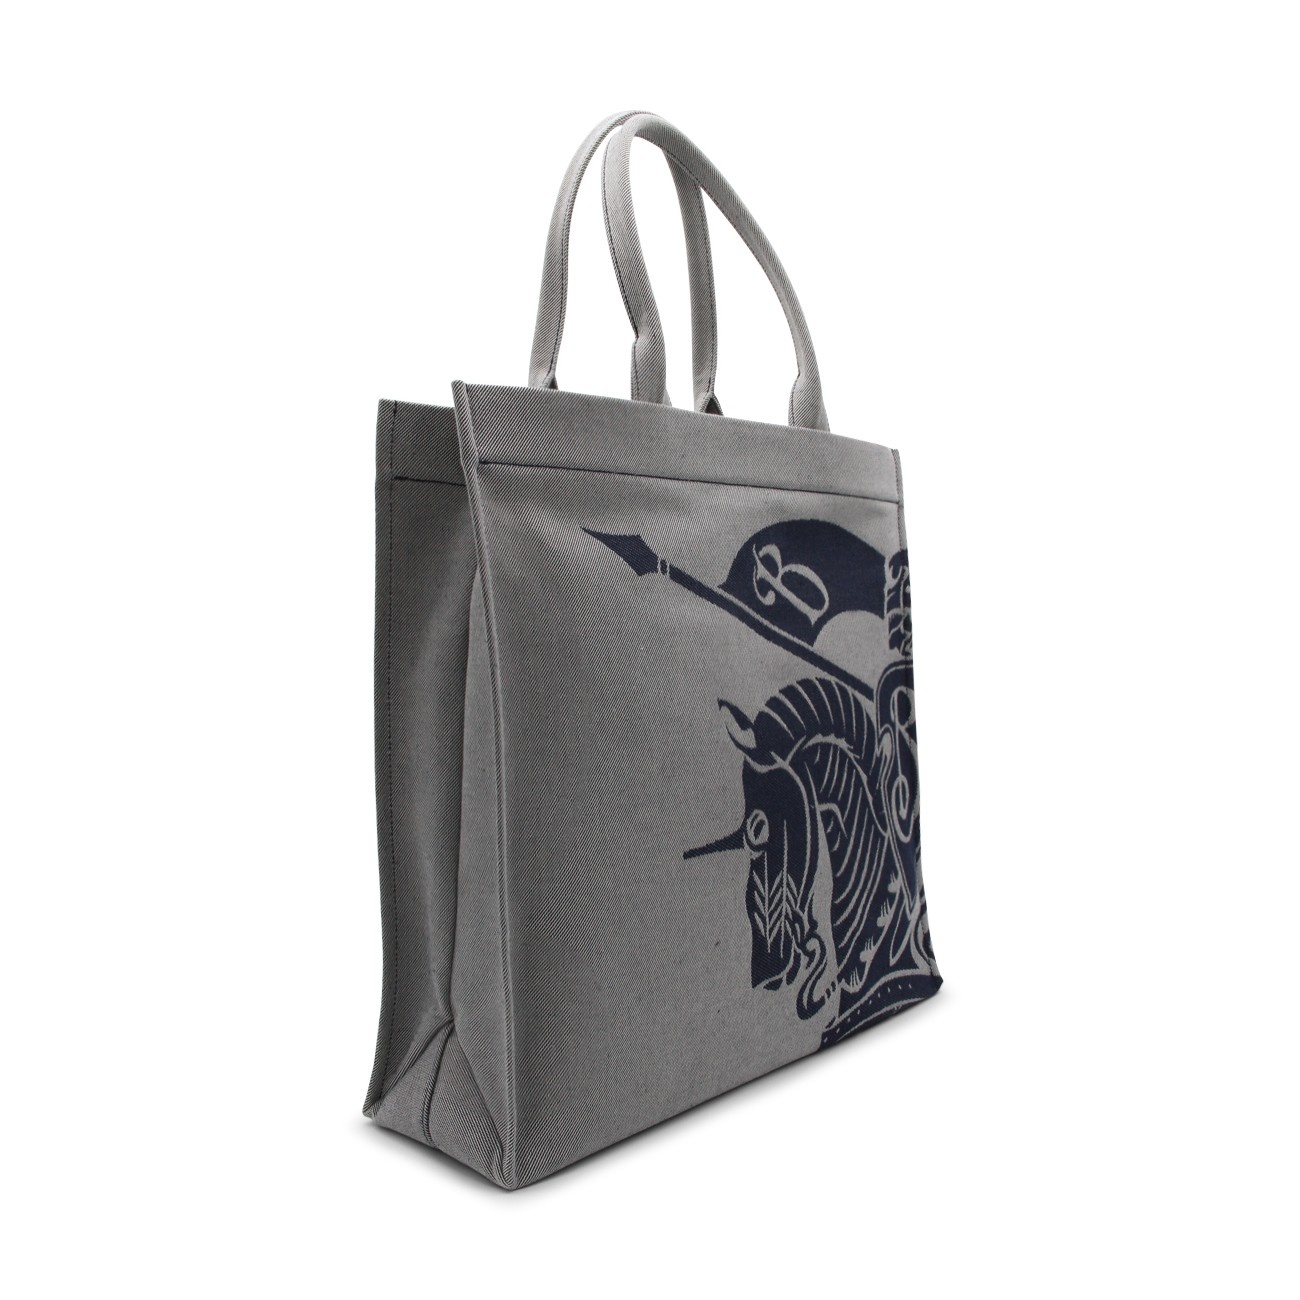 grey leather tote bag - 2